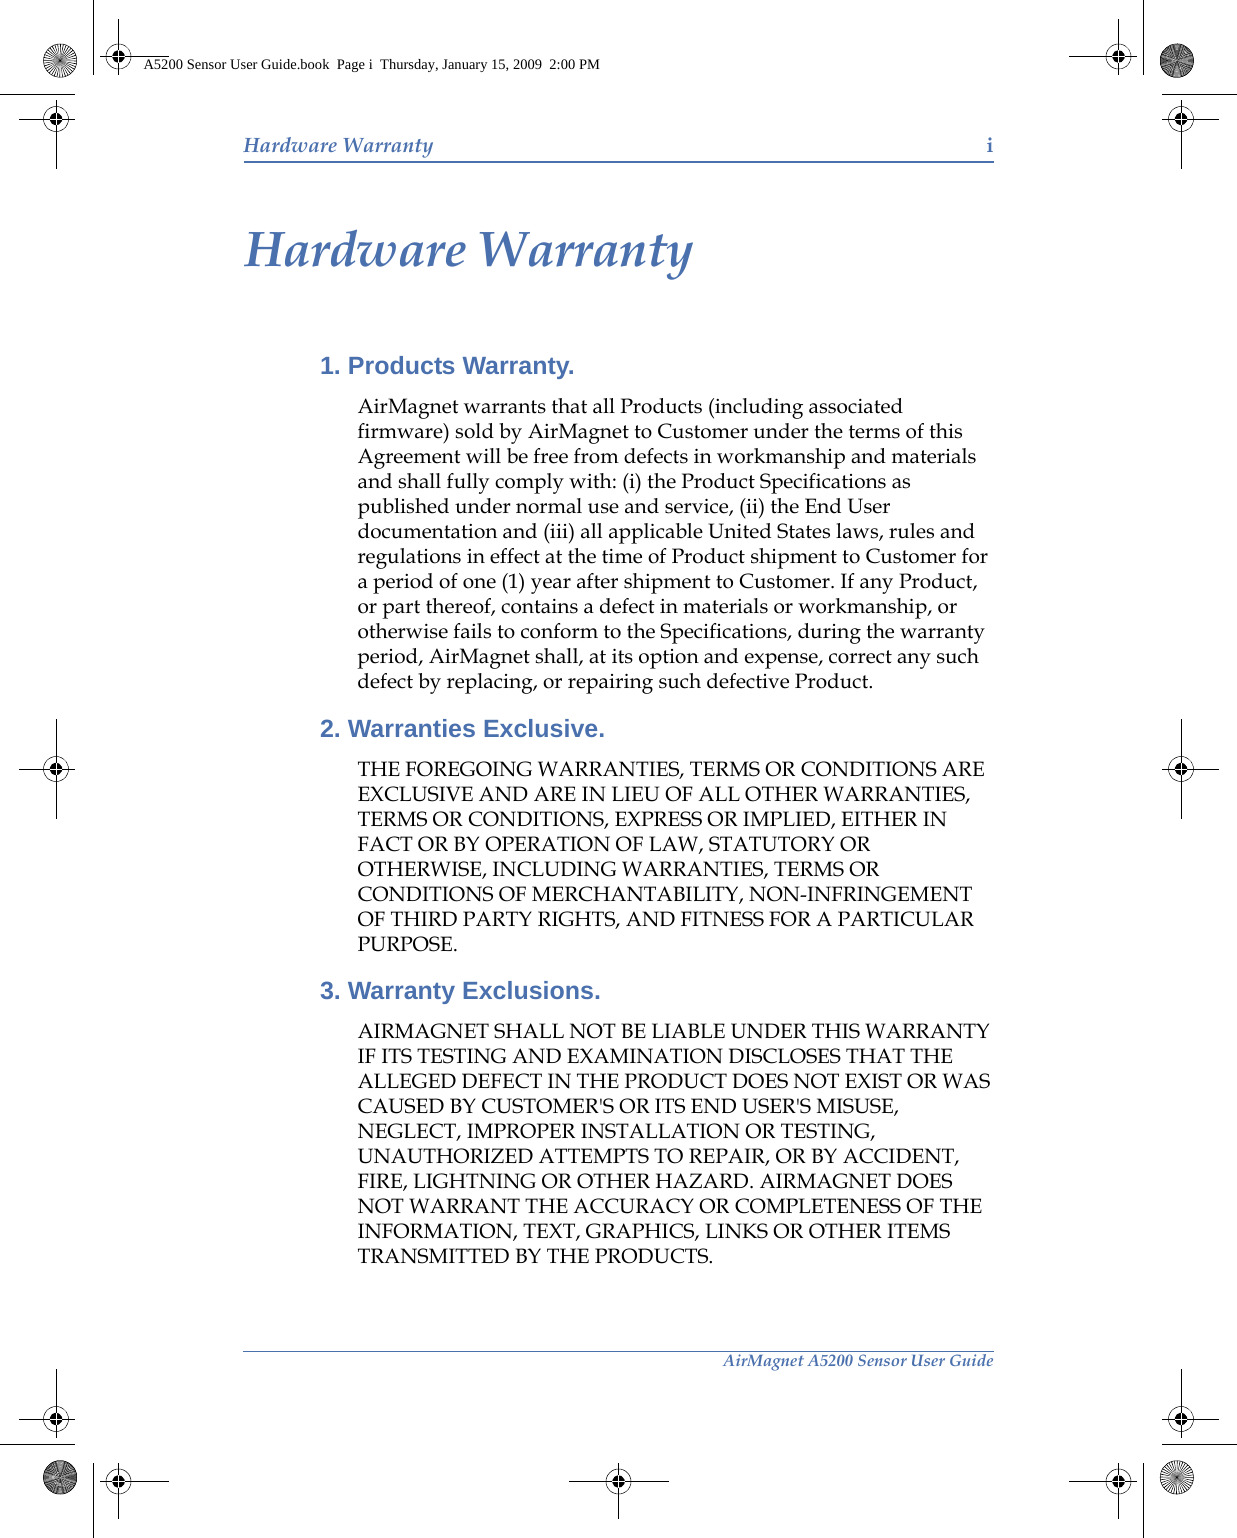 AirMagnet A5200 Sensor User GuideHardware Warranty iHardware Warranty1. Products Warranty. AirMagnet warrants that all Products (including associated firmware) sold by AirMagnet to Customer under the terms of this Agreement will be free from defects in workmanship and materials and shall fully comply with: (i) the Product Specifications as published under normal use and service, (ii) the End User documentation and (iii) all applicable United States laws, rules and regulations in effect at the time of Product shipment to Customer for a period of one (1) year after shipment to Customer. If any Product, or part thereof, contains a defect in materials or workmanship, or otherwise fails to conform to the Specifications, during the warranty period, AirMagnet shall, at its option and expense, correct any such defect by replacing, or repairing such defective Product. 2. Warranties Exclusive. THE FOREGOING WARRANTIES, TERMS OR CONDITIONS ARE EXCLUSIVE AND ARE IN LIEU OF ALL OTHER WARRANTIES, TERMS OR CONDITIONS, EXPRESS OR IMPLIED, EITHER IN FACT OR BY OPERATION OF LAW, STATUTORY OR OTHERWISE, INCLUDING WARRANTIES, TERMS OR CONDITIONS OF MERCHANTABILITY, NON-INFRINGEMENT OF THIRD PARTY RIGHTS, AND FITNESS FOR A PARTICULAR PURPOSE. 3. Warranty Exclusions. AIRMAGNET SHALL NOT BE LIABLE UNDER THIS WARRANTY IF ITS TESTING AND EXAMINATION DISCLOSES THAT THE ALLEGED DEFECT IN THE PRODUCT DOES NOT EXIST OR WAS CAUSED BY CUSTOMER&apos;S OR ITS END USER&apos;S MISUSE, NEGLECT, IMPROPER INSTALLATION OR TESTING, UNAUTHORIZED ATTEMPTS TO REPAIR, OR BY ACCIDENT, FIRE, LIGHTNING OR OTHER HAZARD. AIRMAGNET DOES NOT WARRANT THE ACCURACY OR COMPLETENESS OF THE INFORMATION, TEXT, GRAPHICS, LINKS OR OTHER ITEMS TRANSMITTED BY THE PRODUCTS. A5200 Sensor User Guide.book  Page i  Thursday, January 15, 2009  2:00 PM